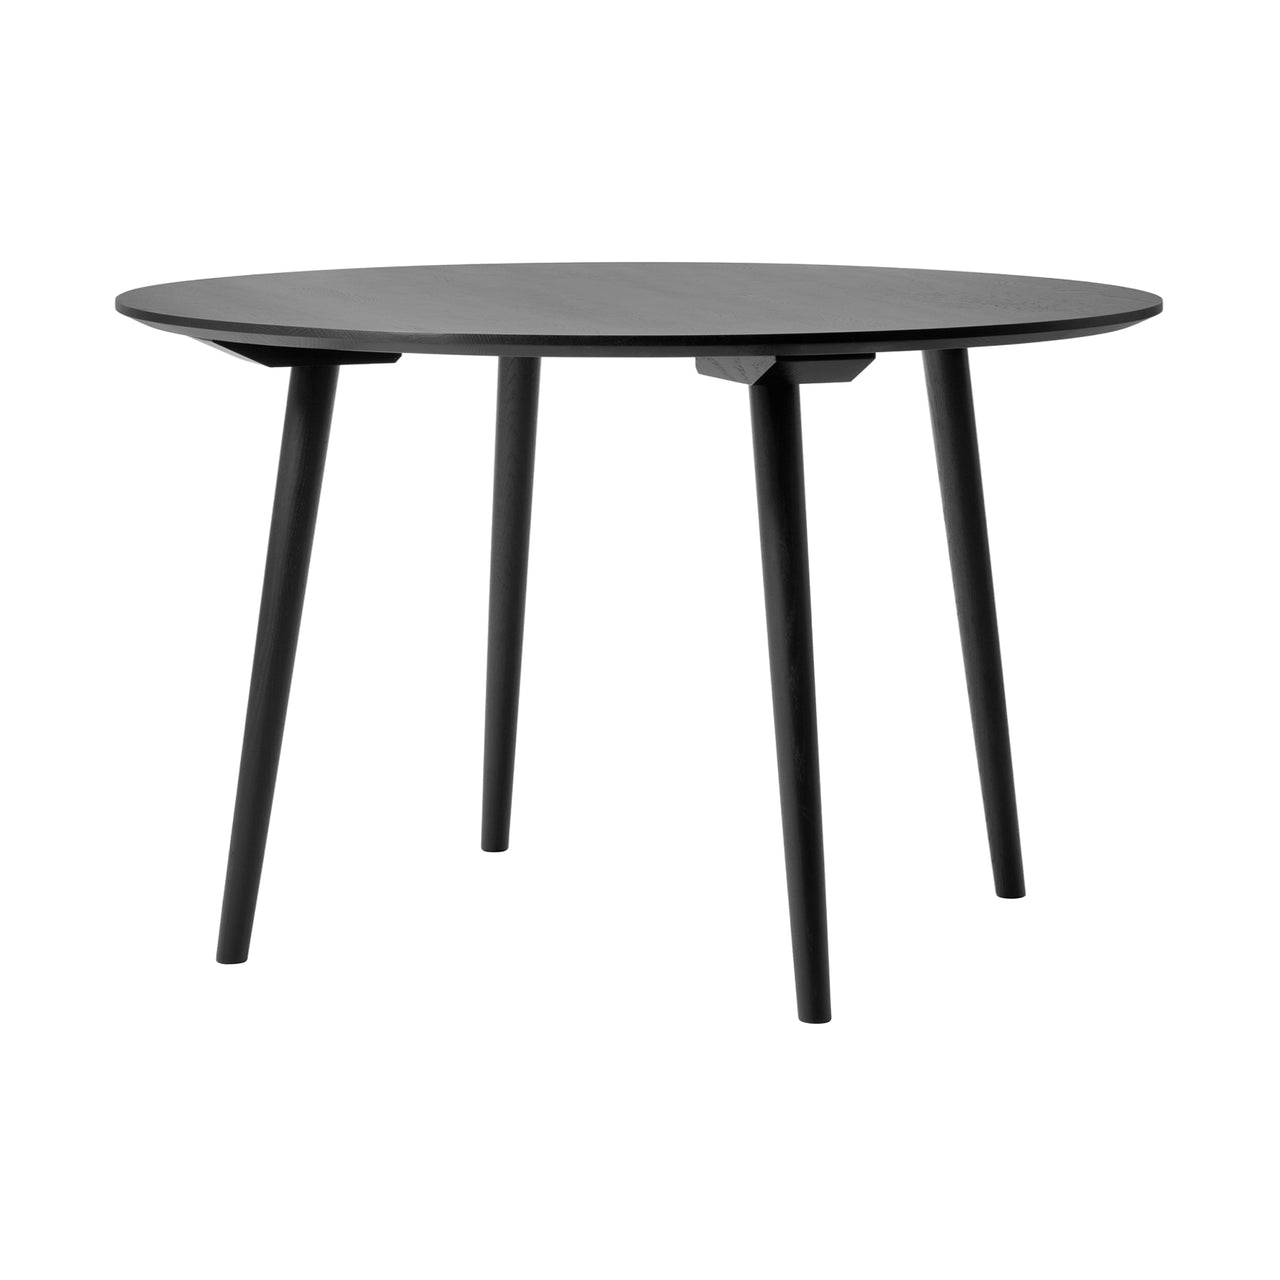 In Between Round Dining Table SK3 + SK4: Large (SK4) - 47.2